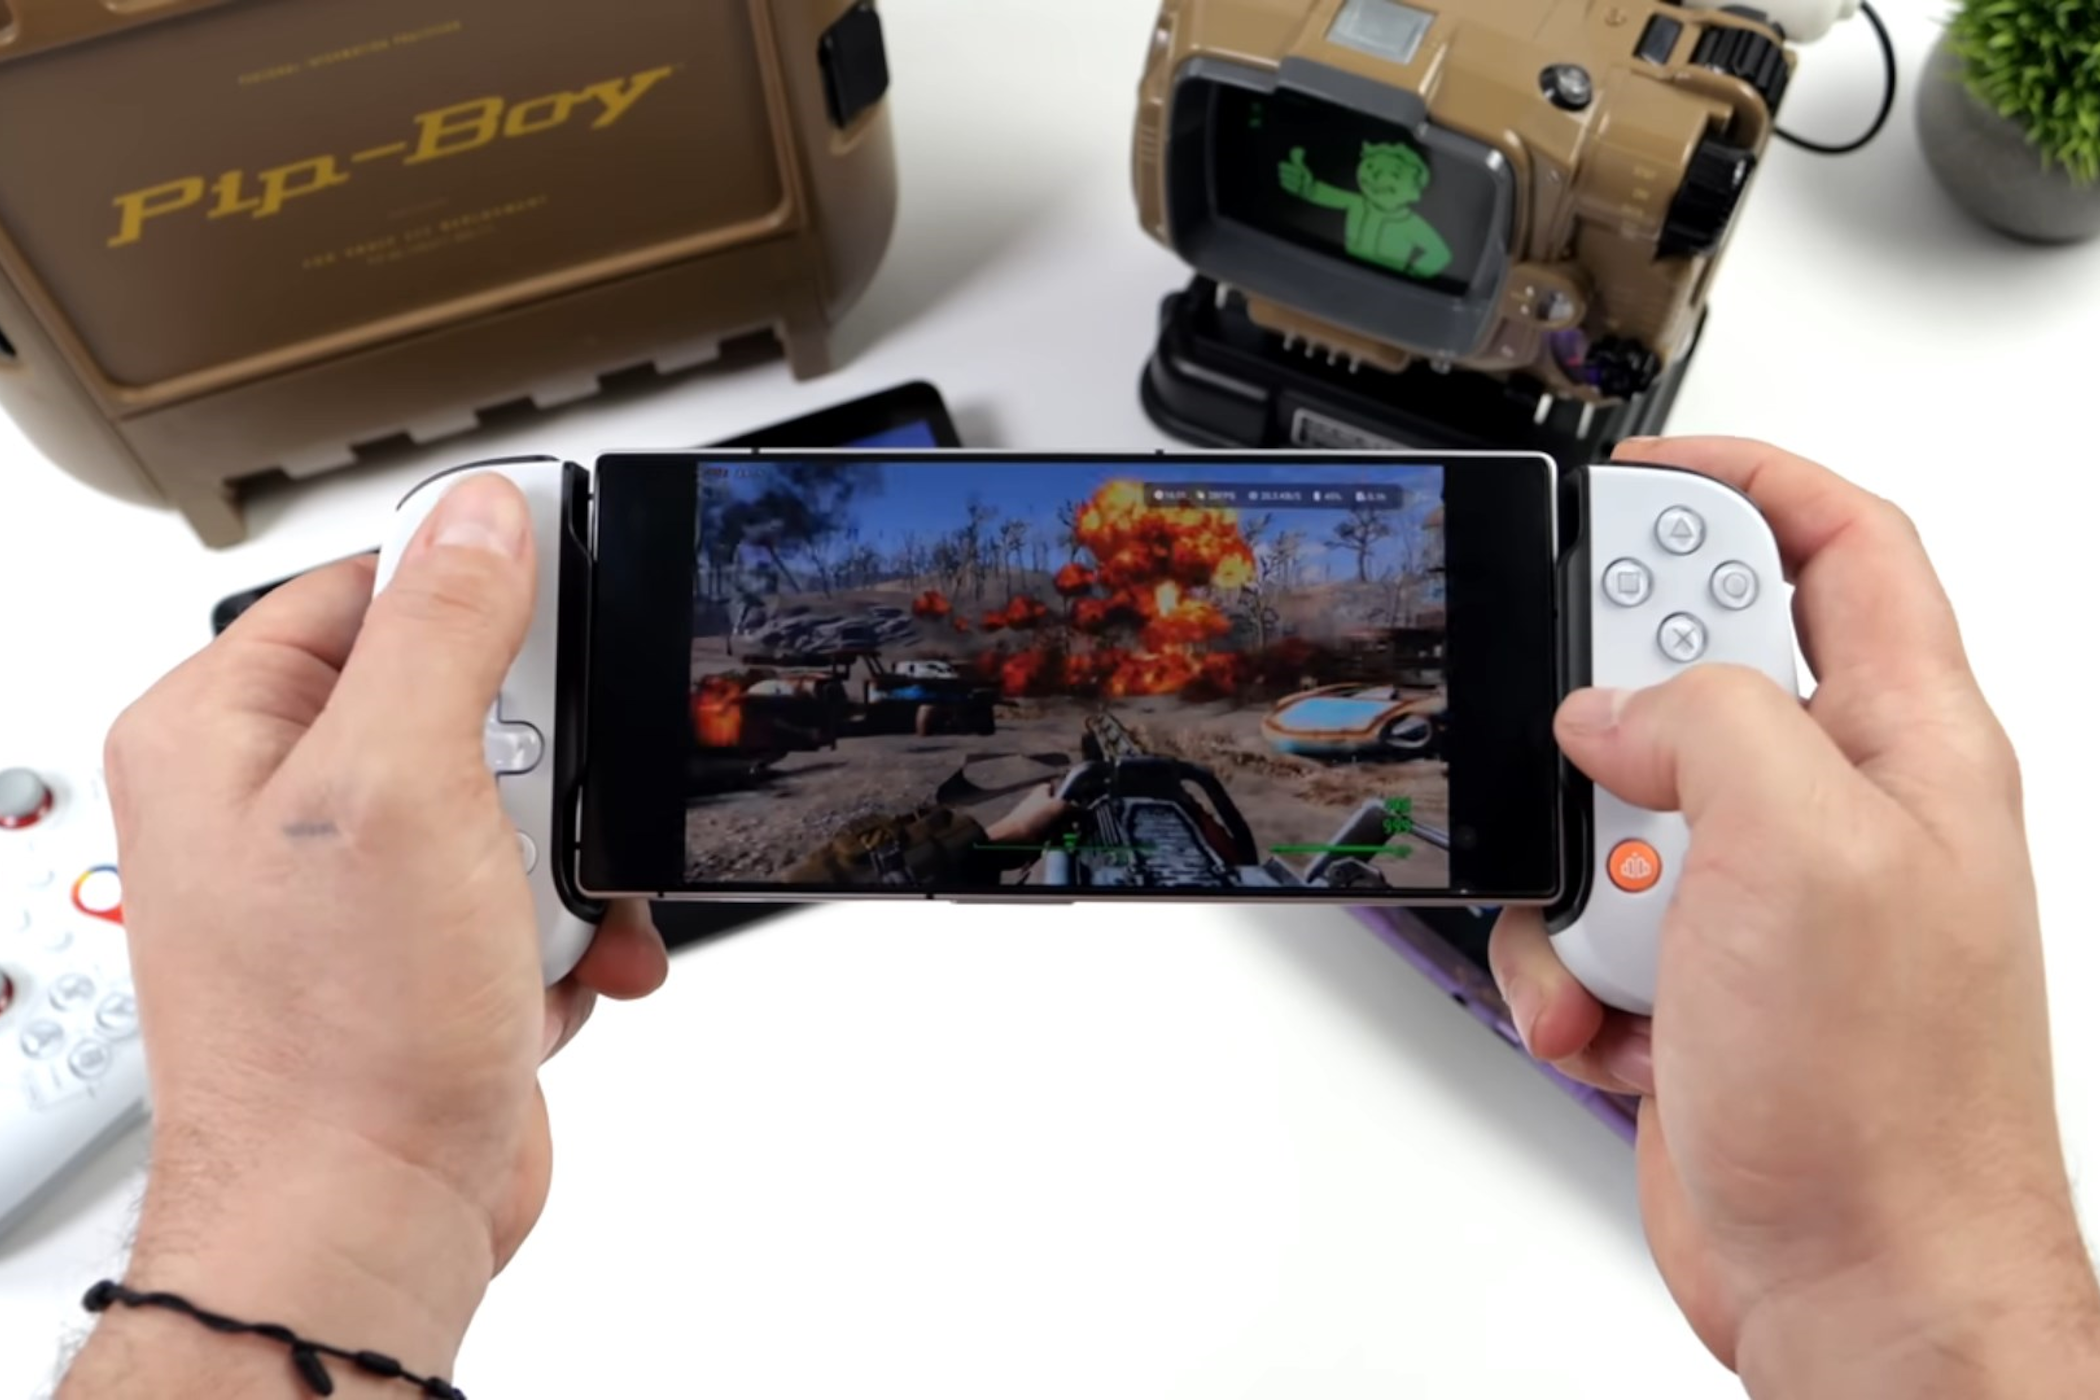 Winlator can turn your Android phone into a portable gaming PC, with some caveats